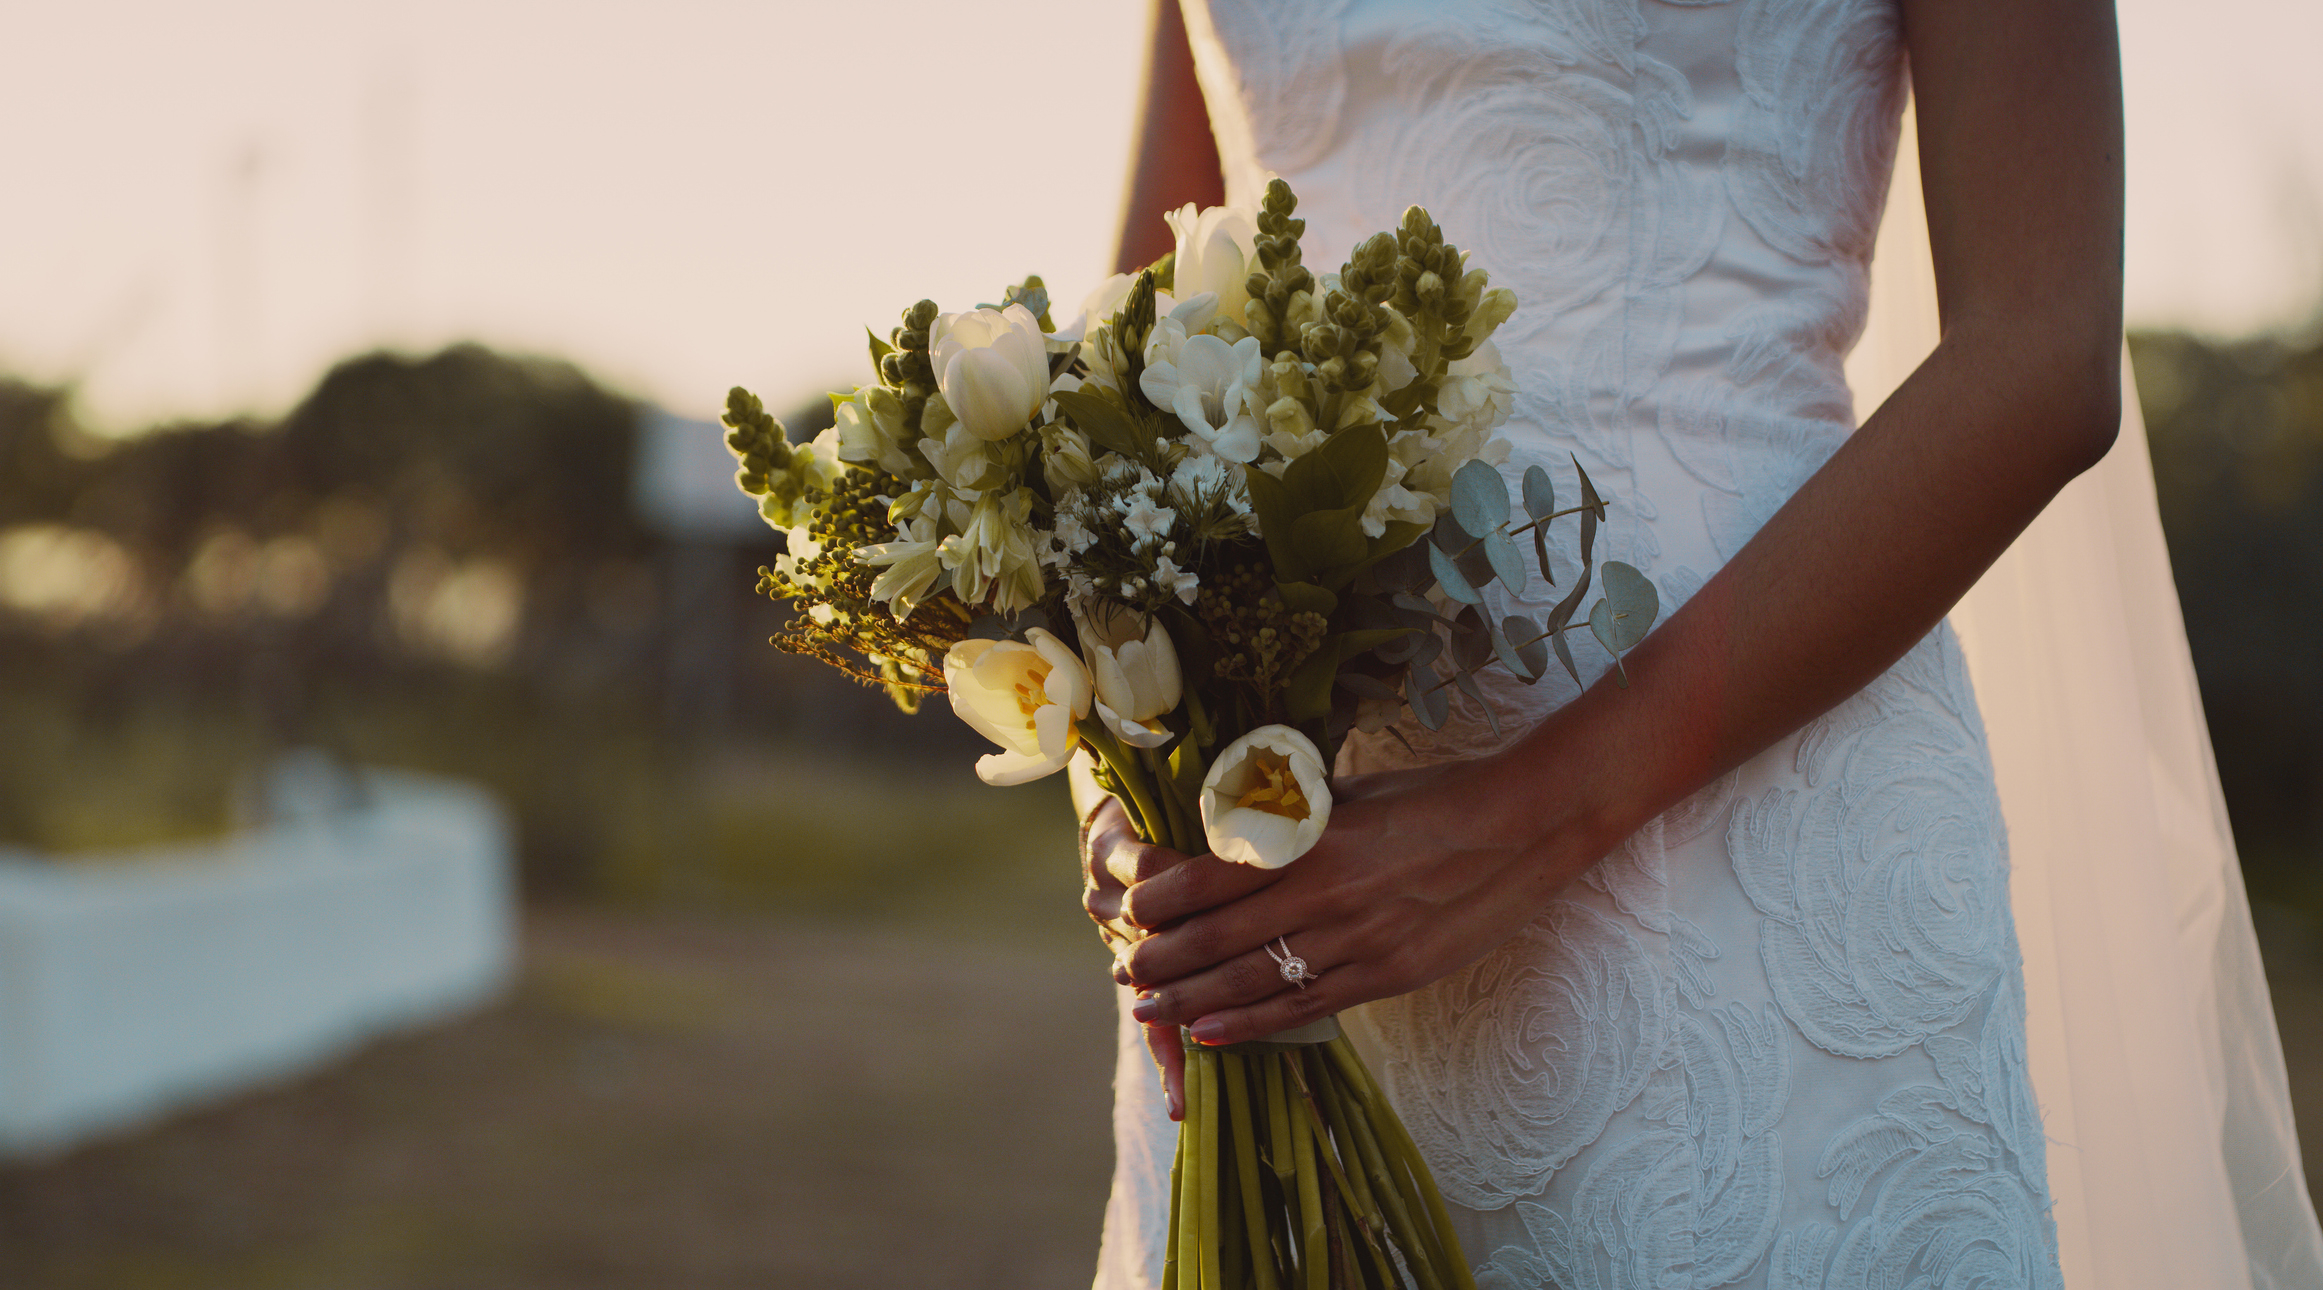 A person in a wedding dress holds a bouquet of flowers outdoors, with greenery in the background